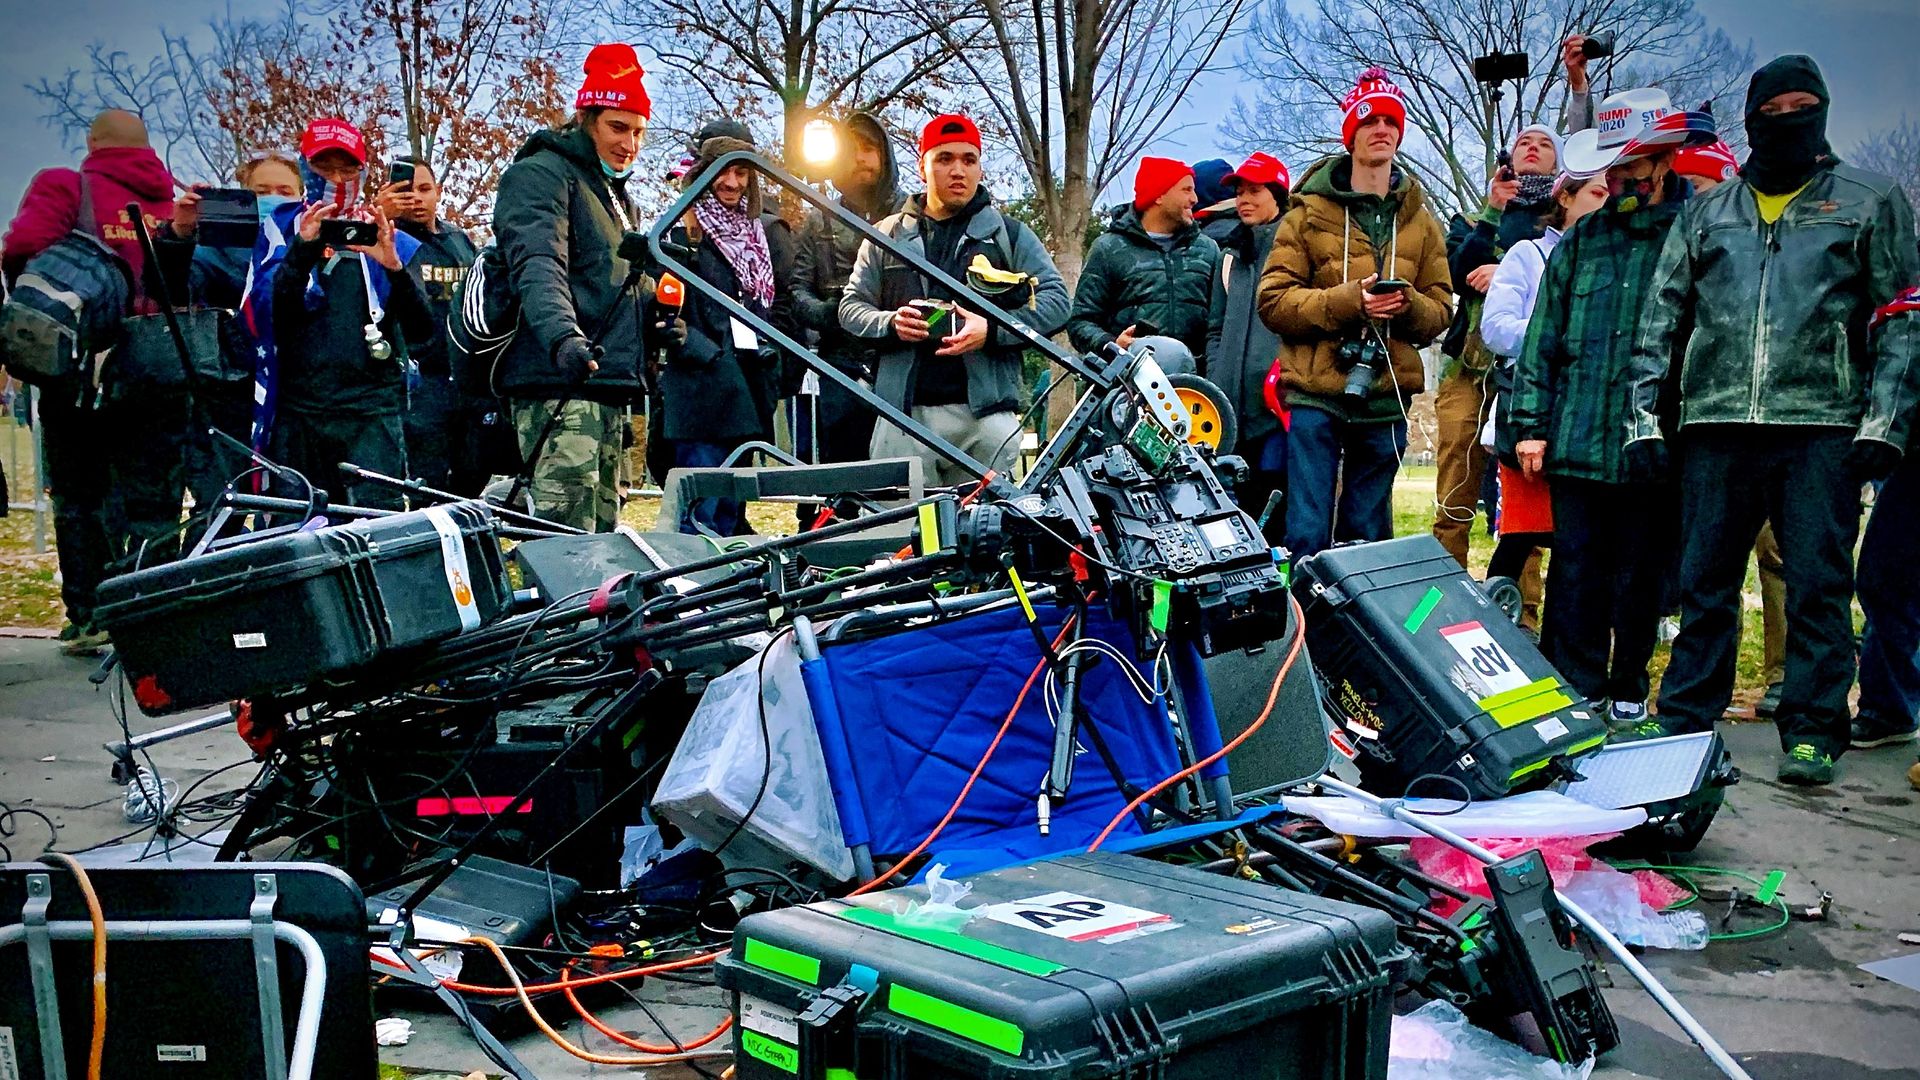 Supporters of US President Donald Trump stand next to media equipment they destroyed during a protest on January 6, 2021